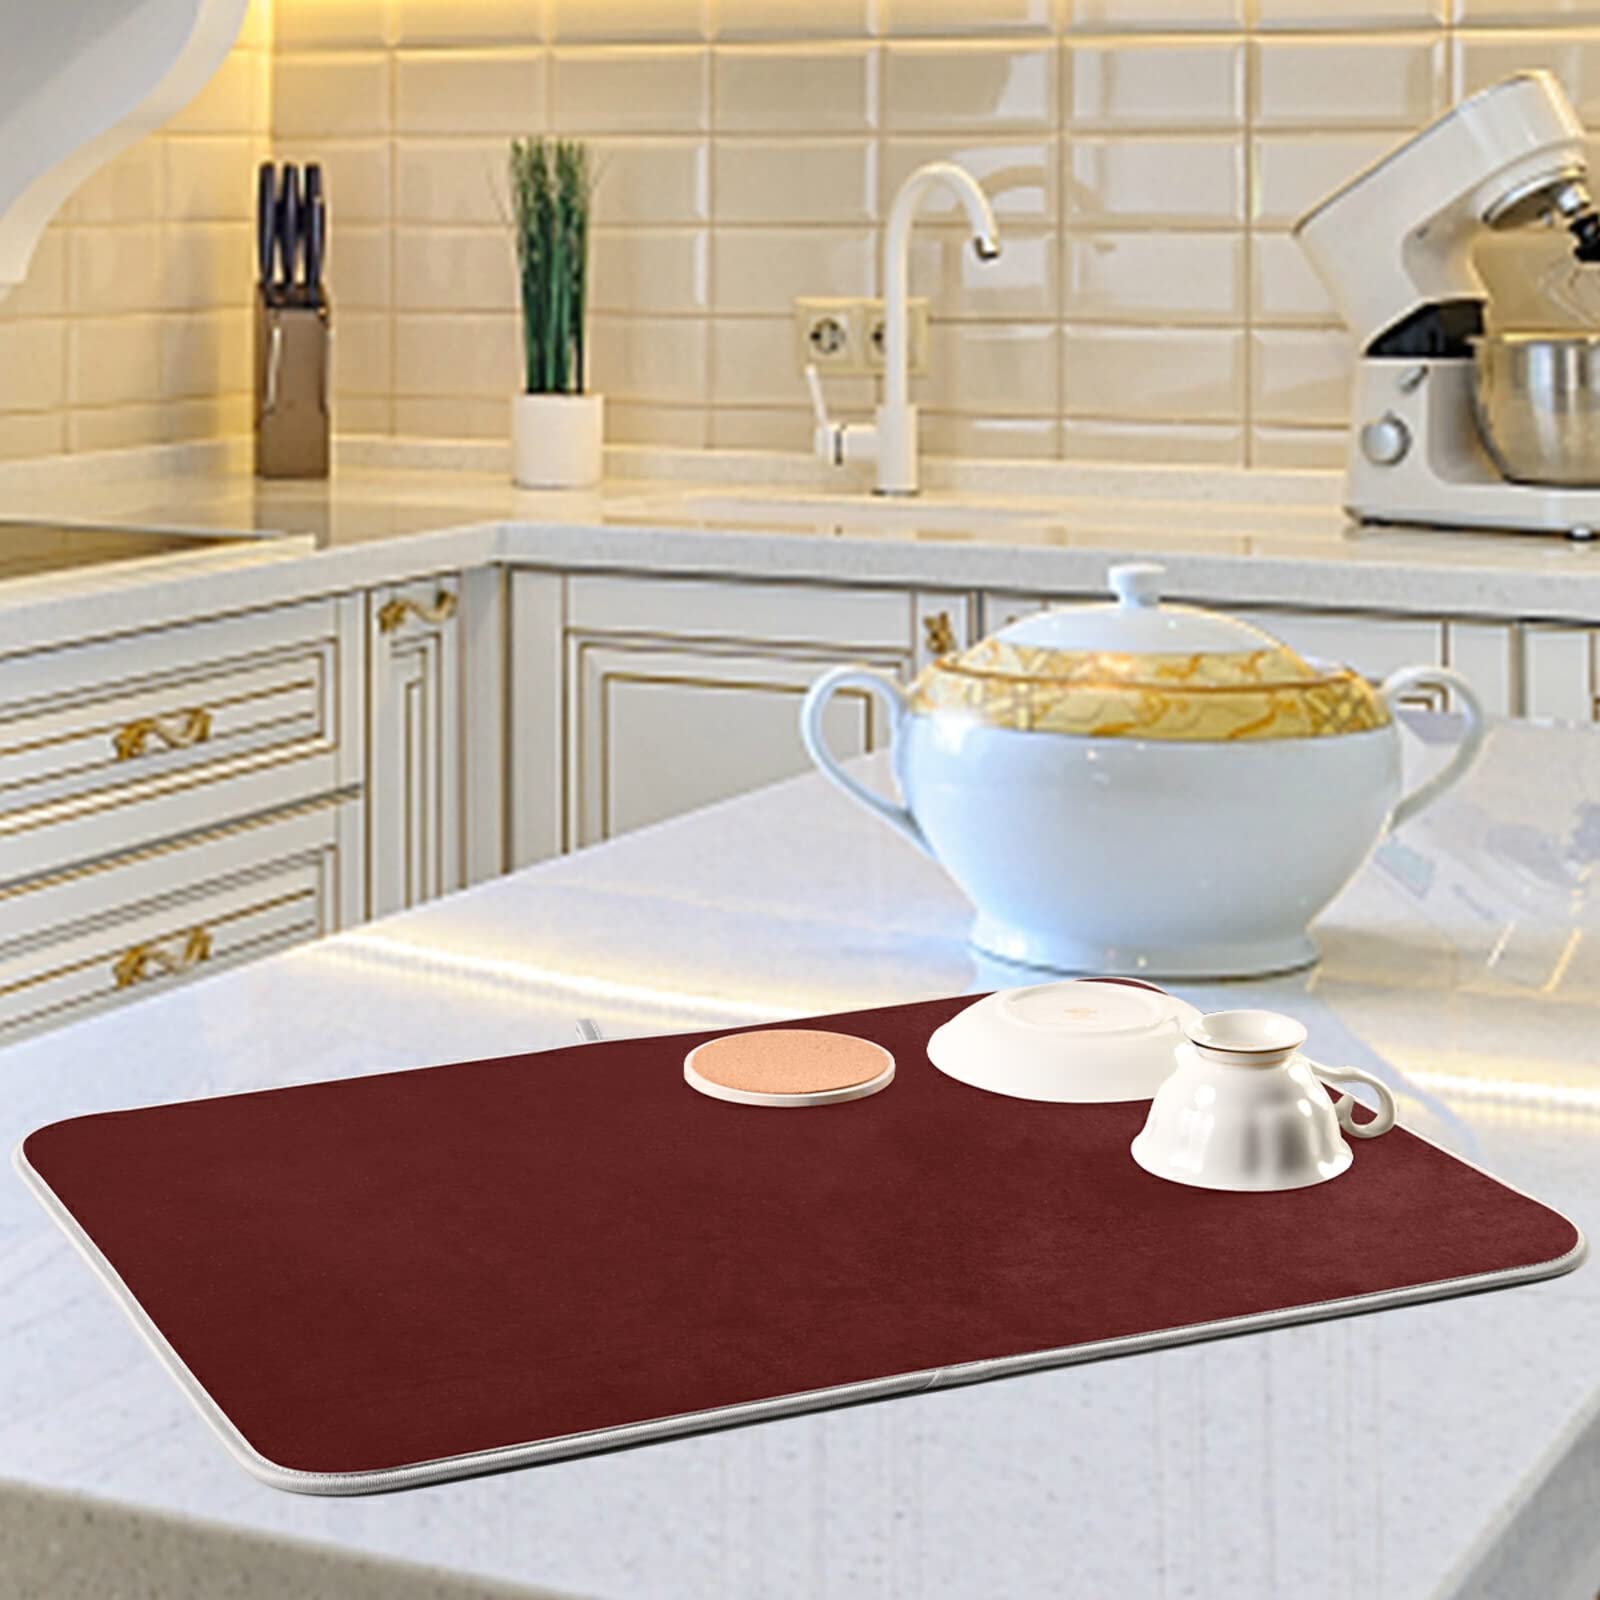 Burgundy Large Dish Drying Mat Xl for Dishes Kitchen Accessories Counter Microfiber Dish Drainer Pad Heat Resistant Mat Decor 18x24 Inch